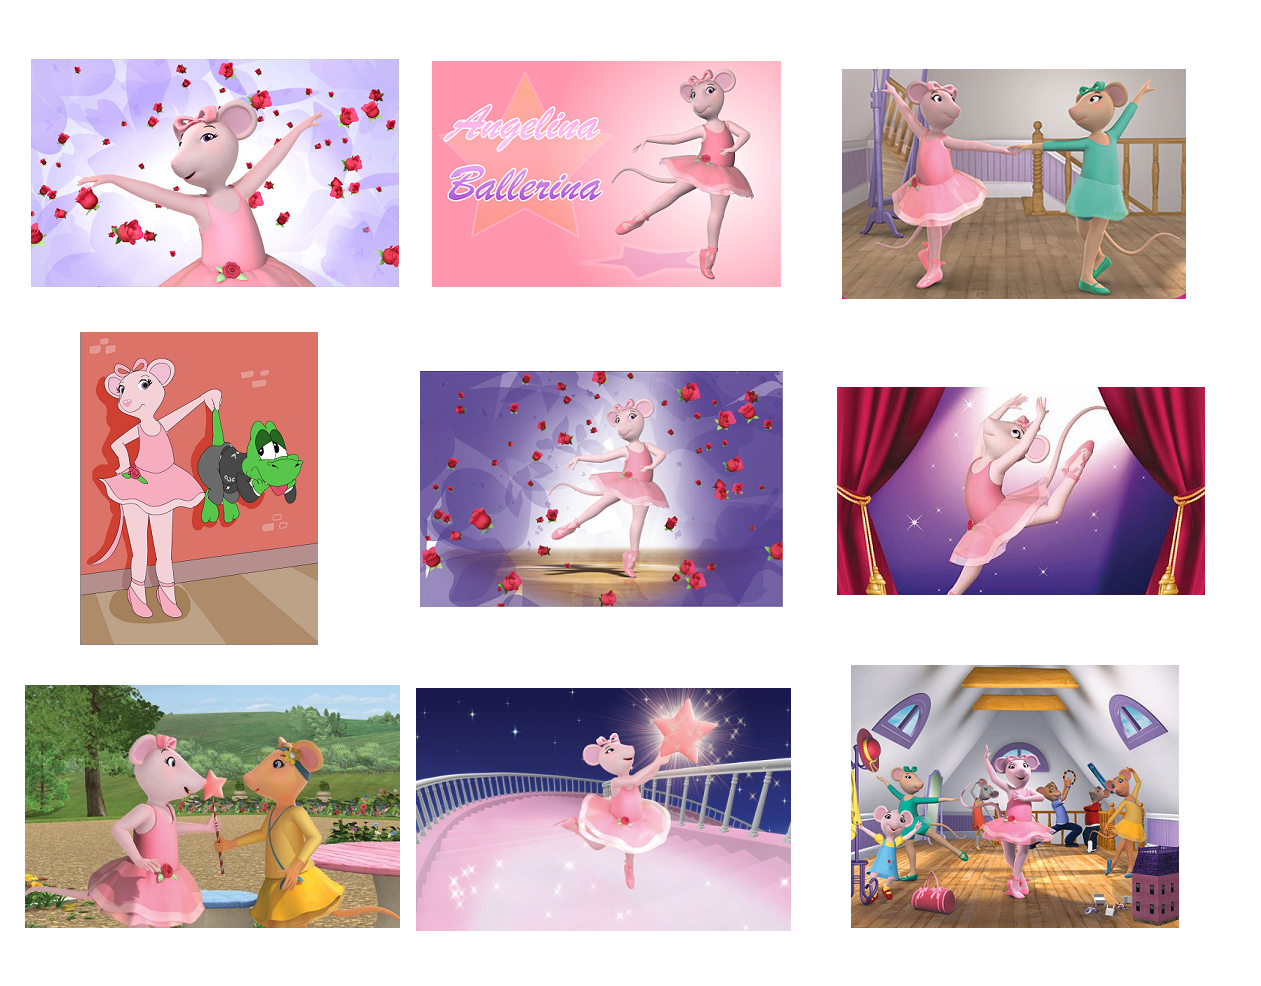 9 Angelina Ballerina Inspired Stickers, Party Supplies,Decorations,Favors,Labels - $11.99